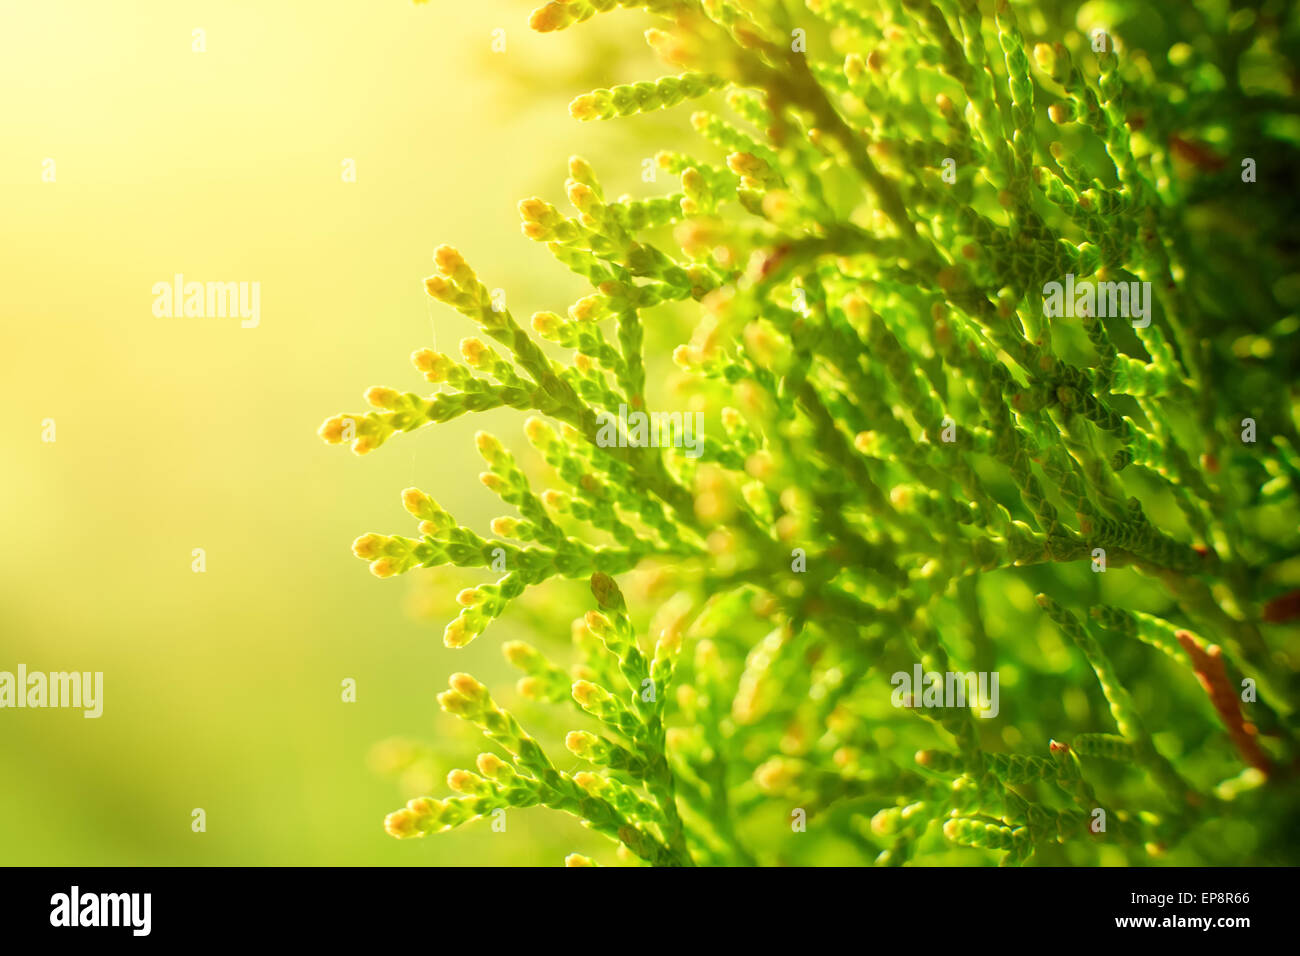 Green Hedge of Thuja Trees. Macro shot thuja branches in the sunlight. Stock Photo